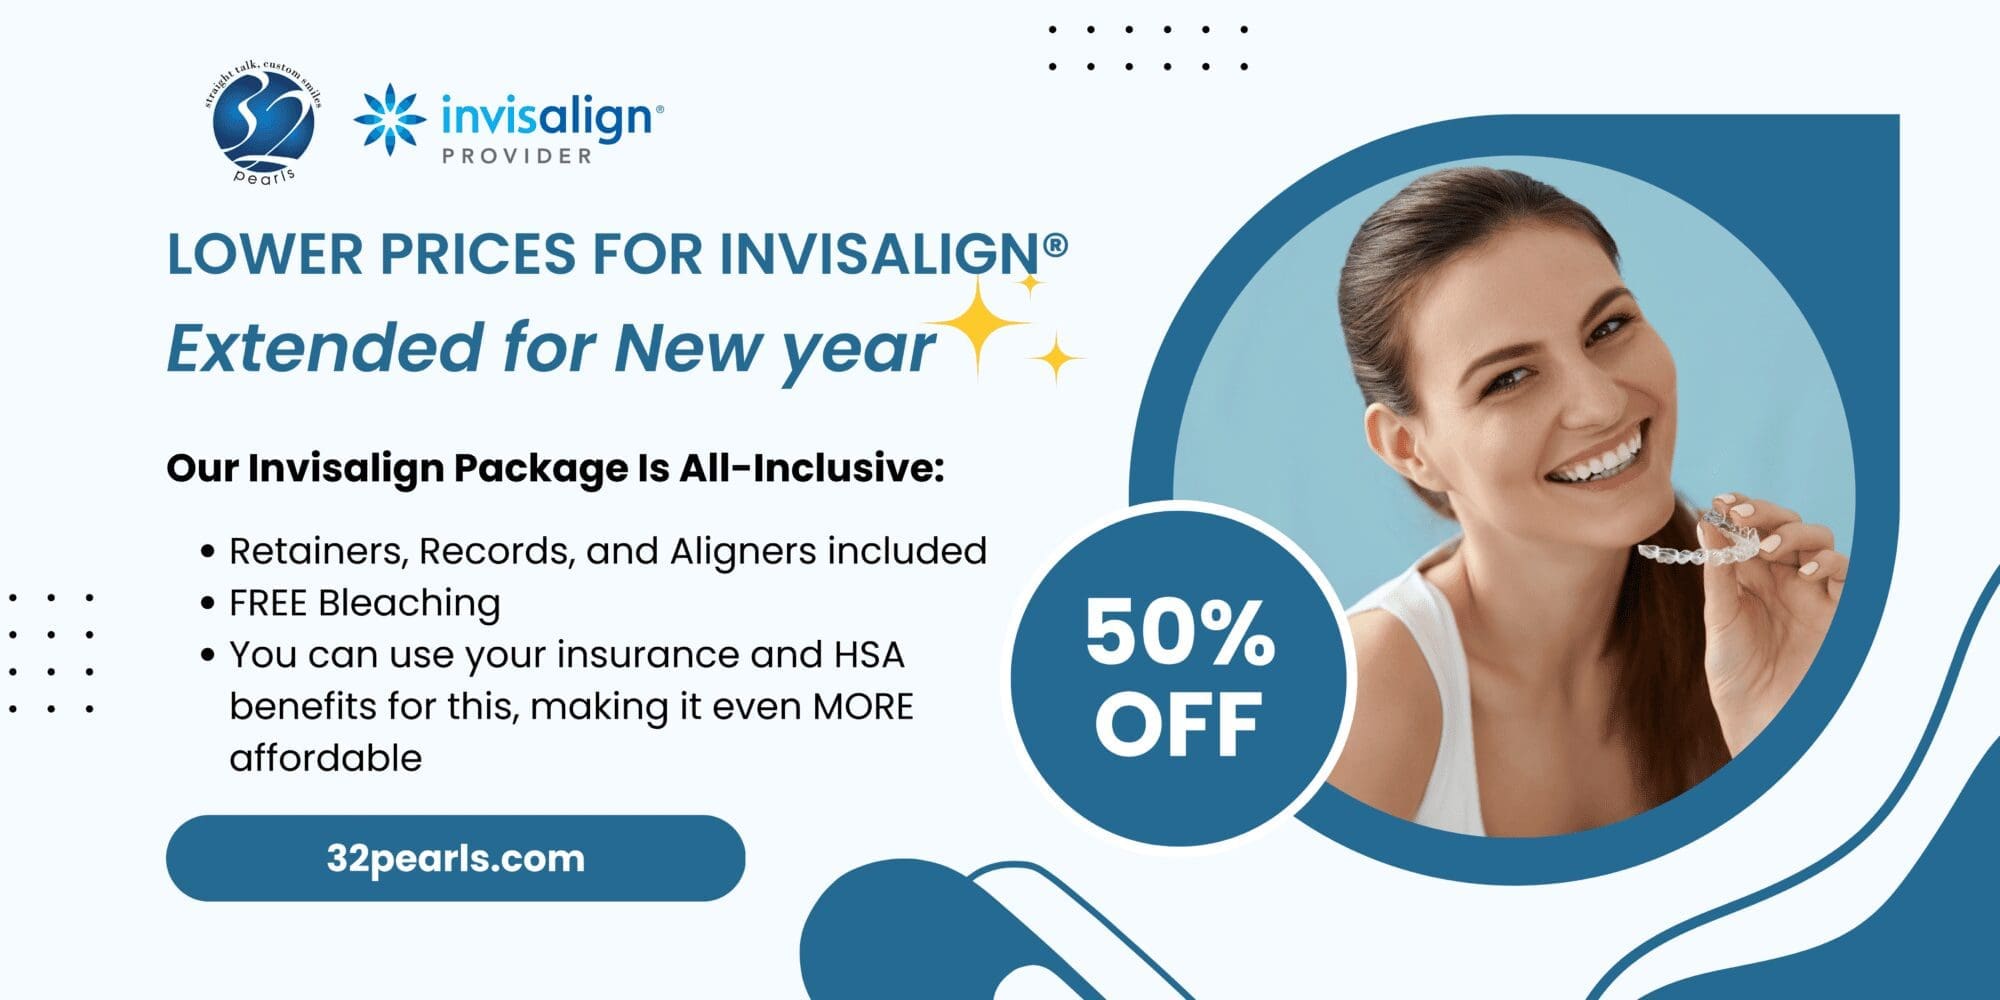 Lower Prices for Invisalign® Extended for New year